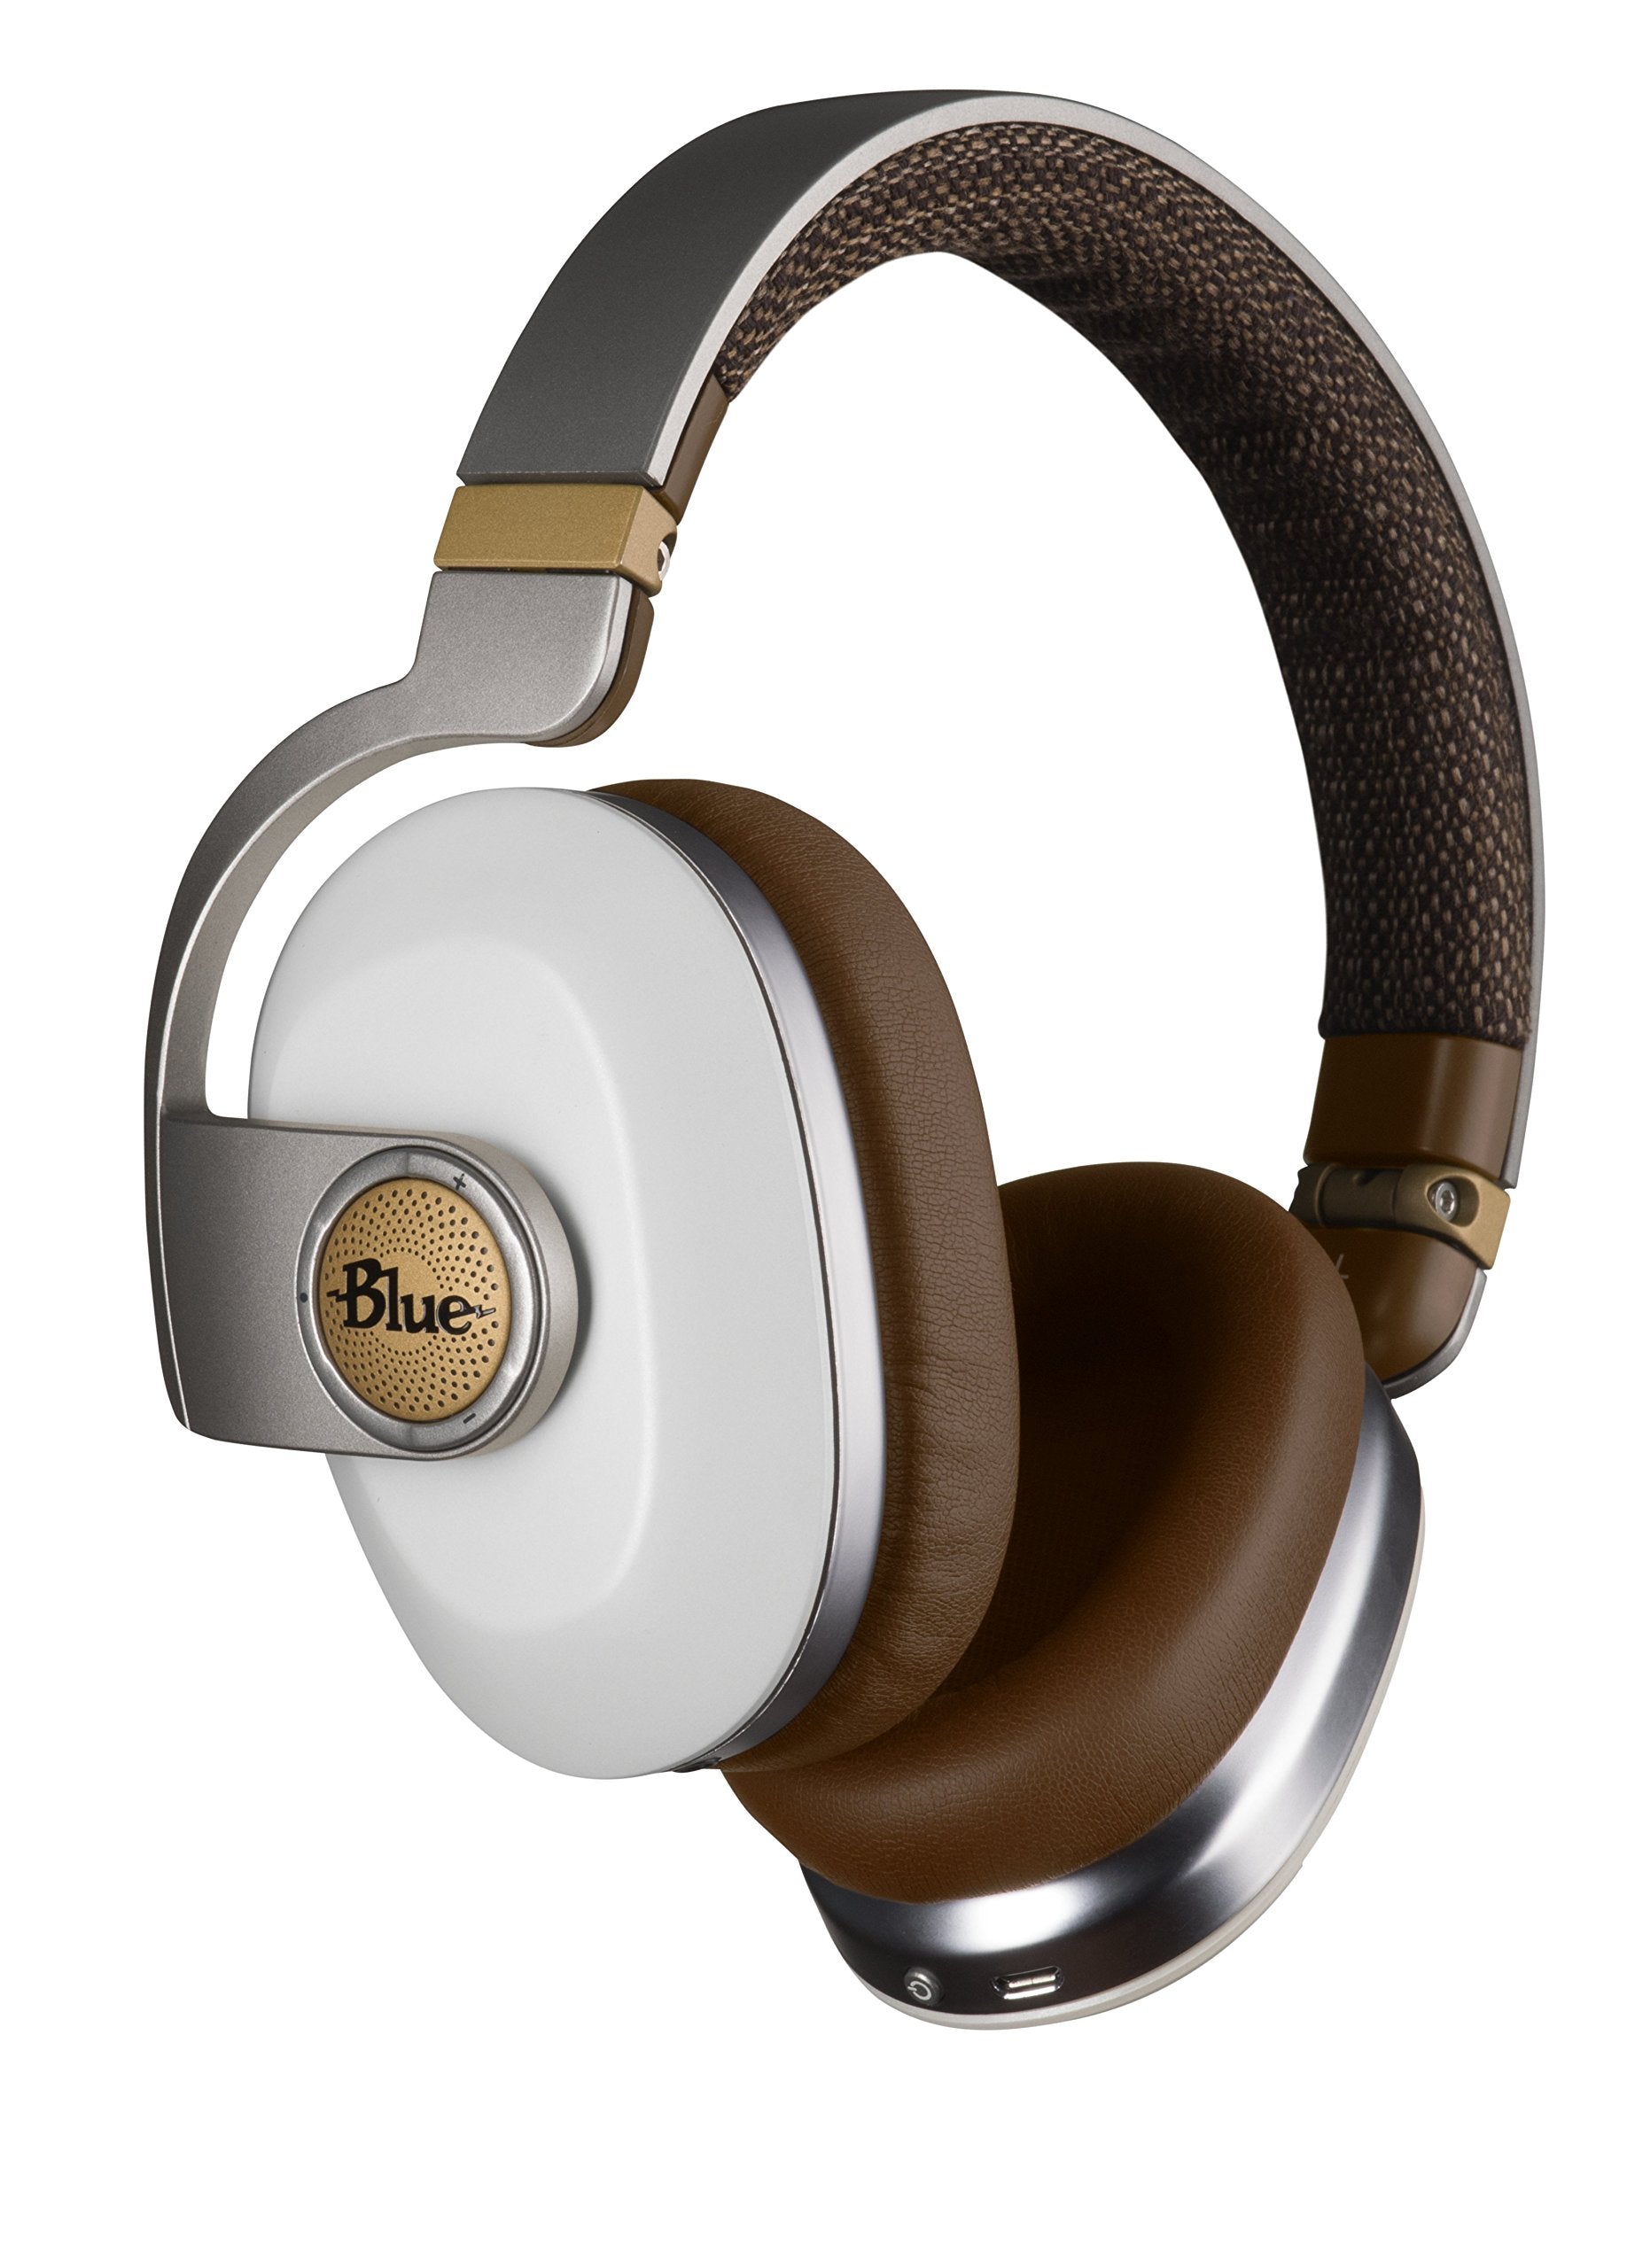 Blue Satellite Premium Wireless Noise-Cancelling Headphones with Audiophile Amp (White) (7136)